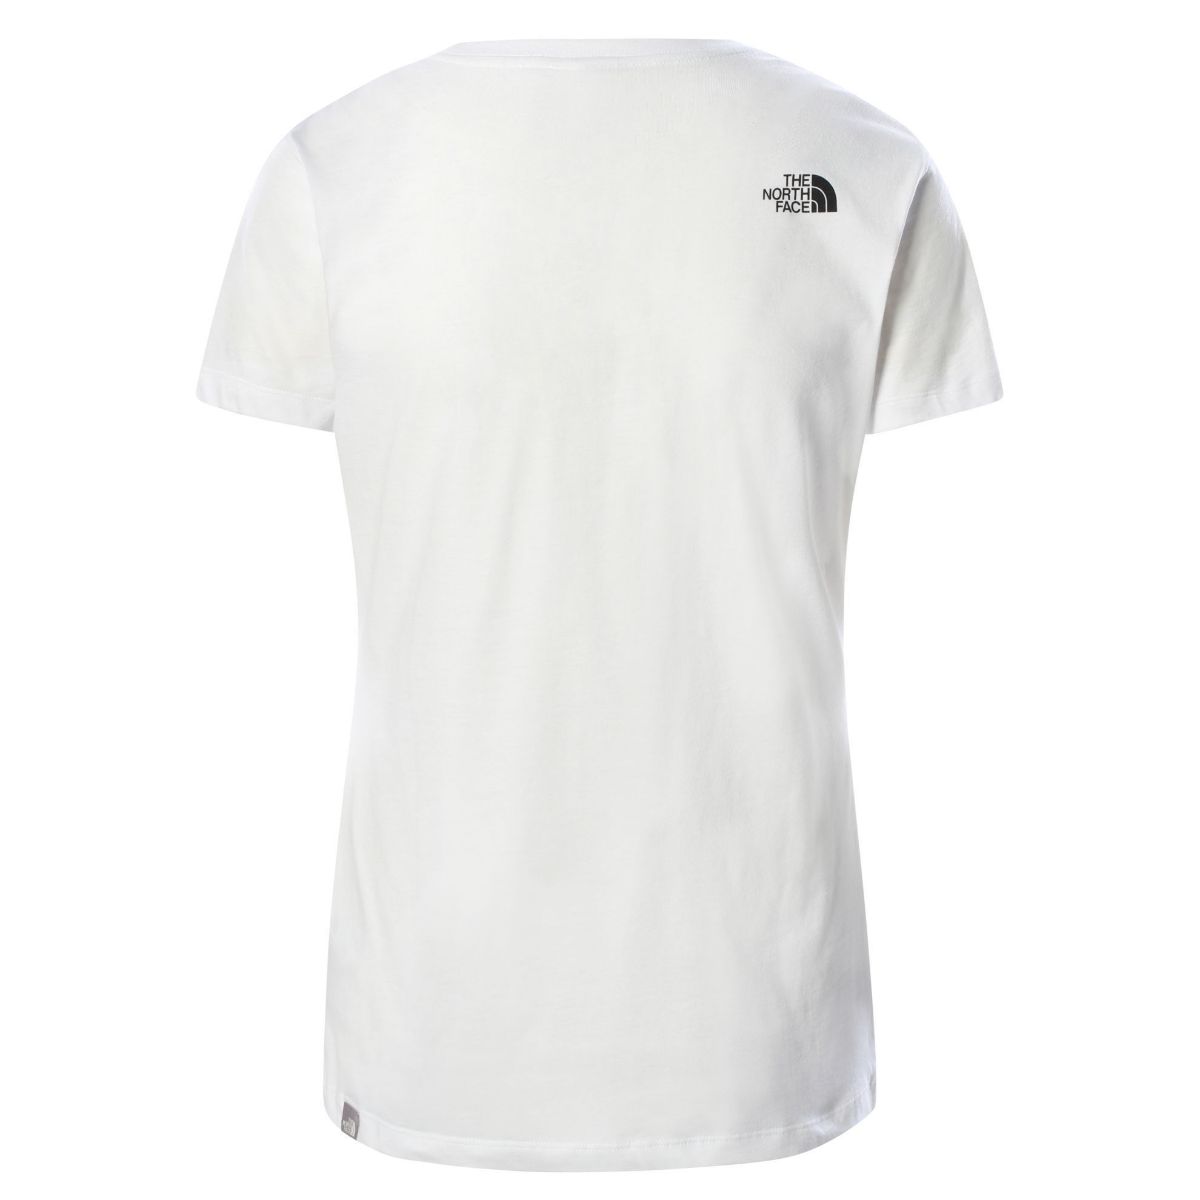 Bilde av The North Face W s/s Simple Dome Tee, White NF0A4T1AFN41